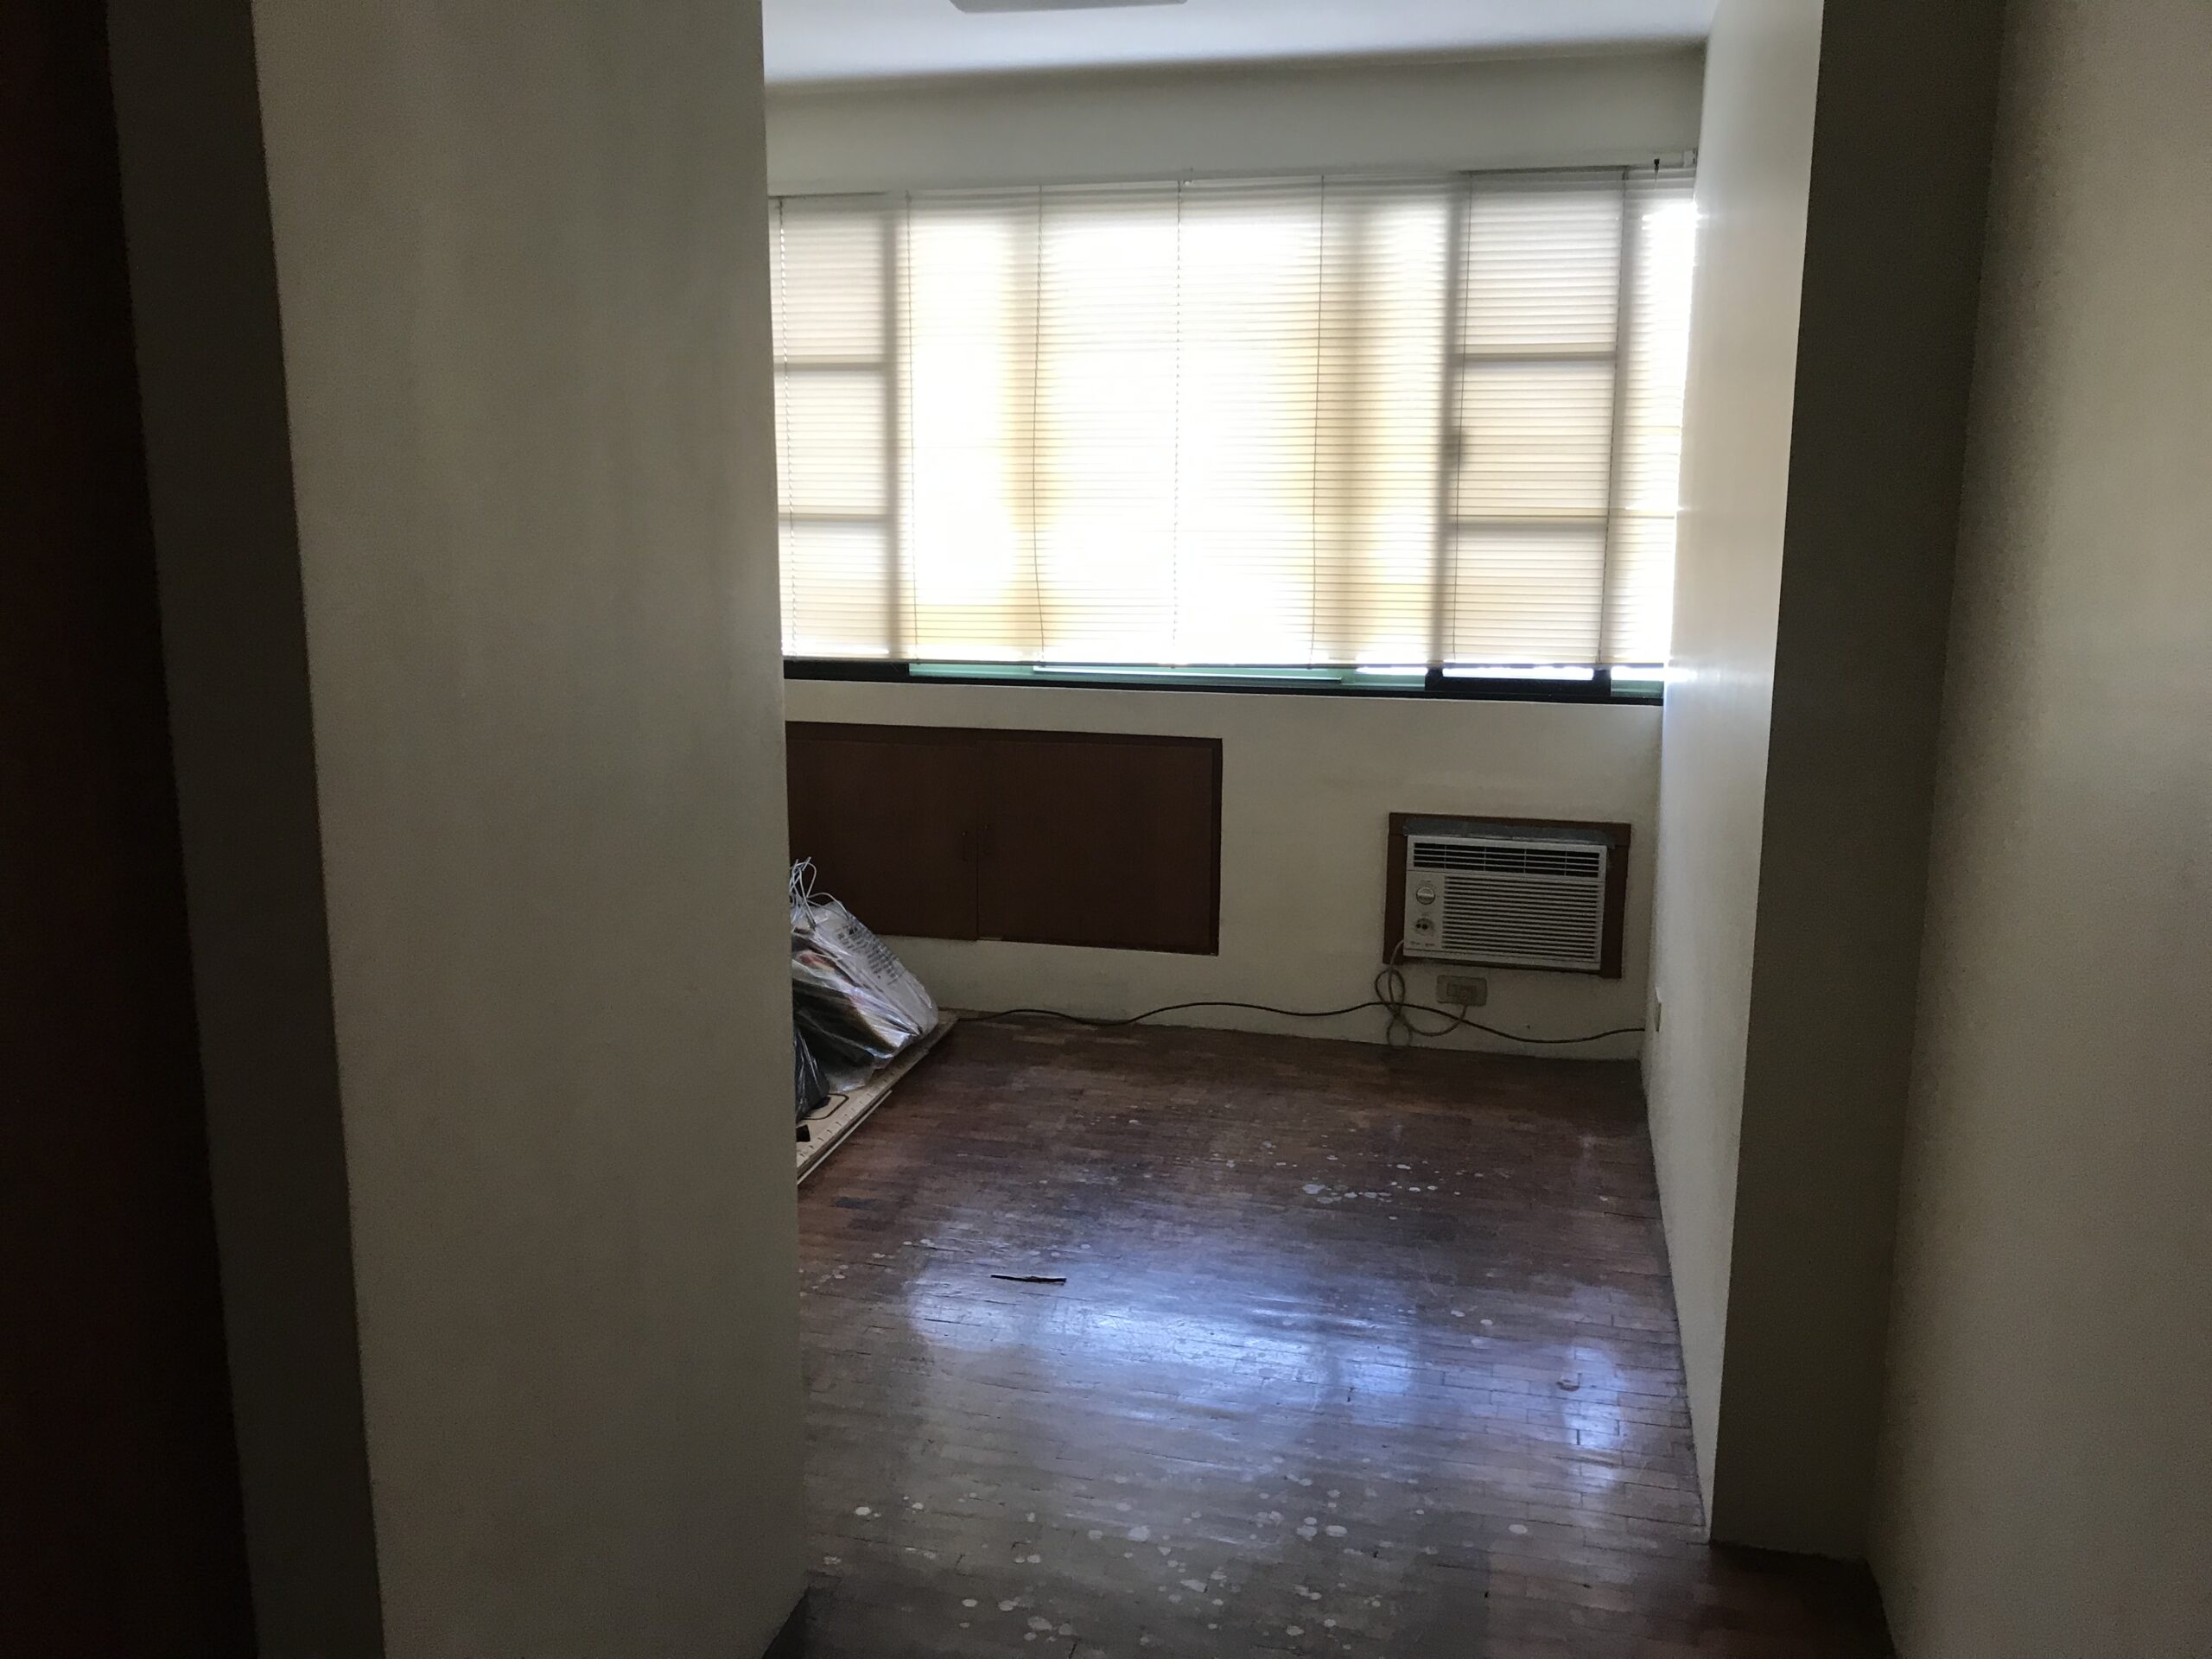 For Sale! 2 BR Condo unit in Pioneer Highlands, Mandaluyong